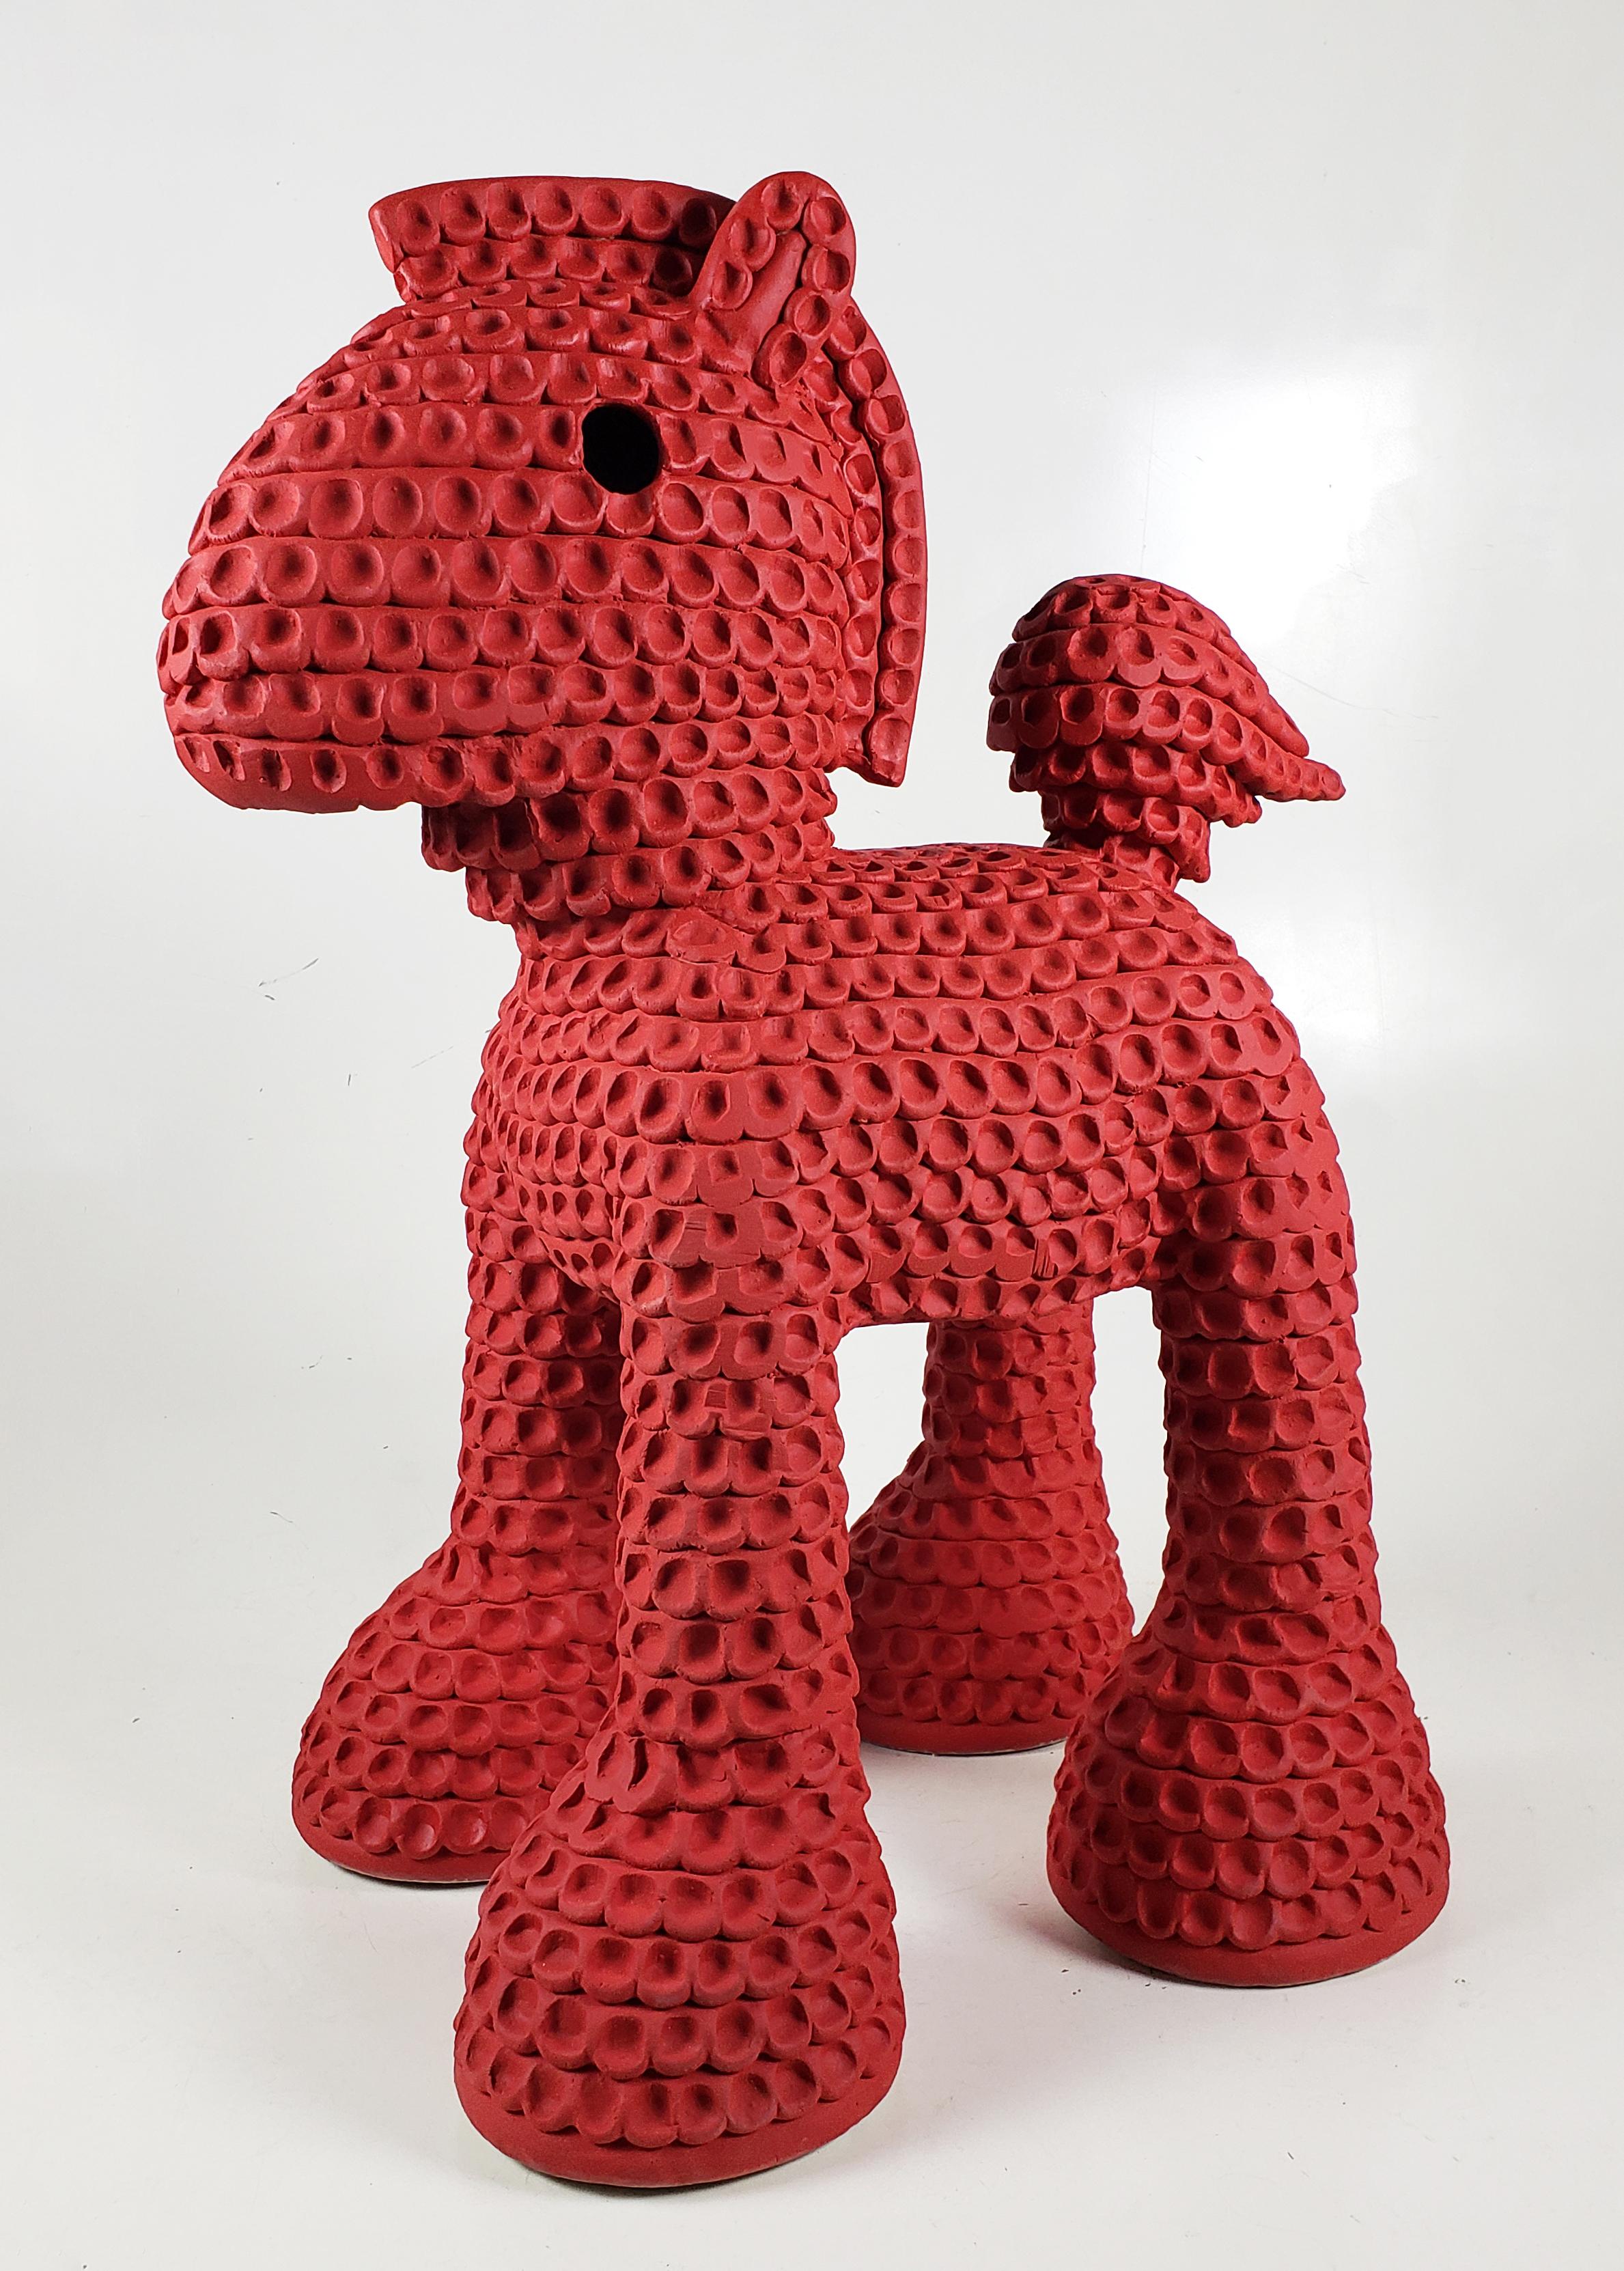 Austyn Taylor Abstract Sculpture - "Ithaca" Large Red Abstract Contemporary Stoneware Sculpture of a Pony